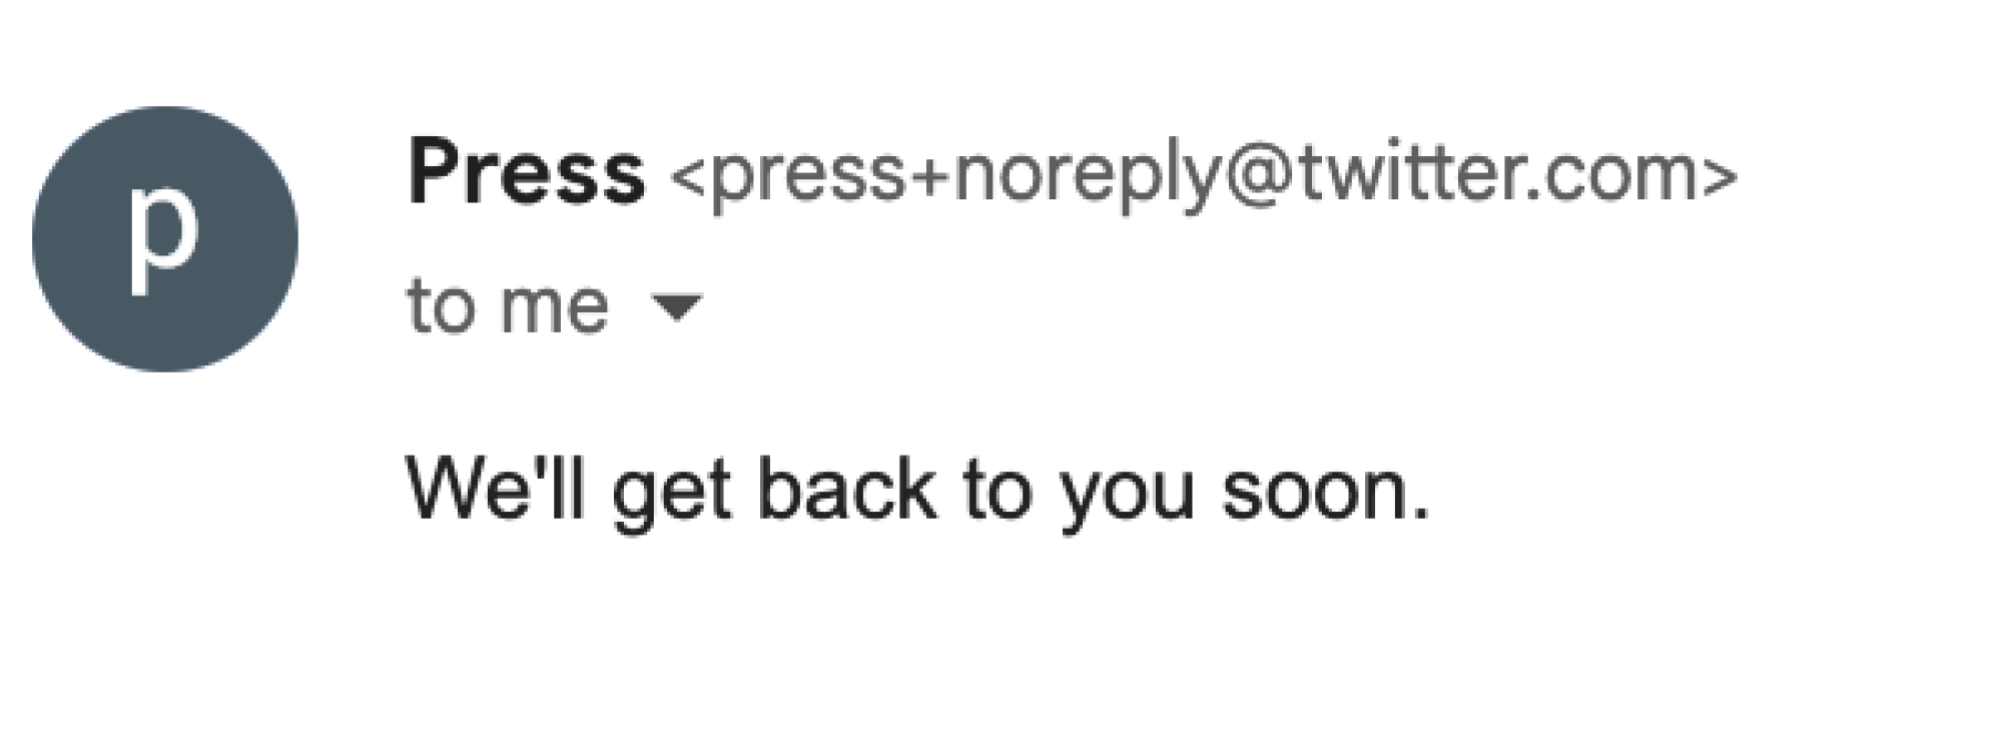 screenshot of press email from twitter reading "We'll get back to you soon."